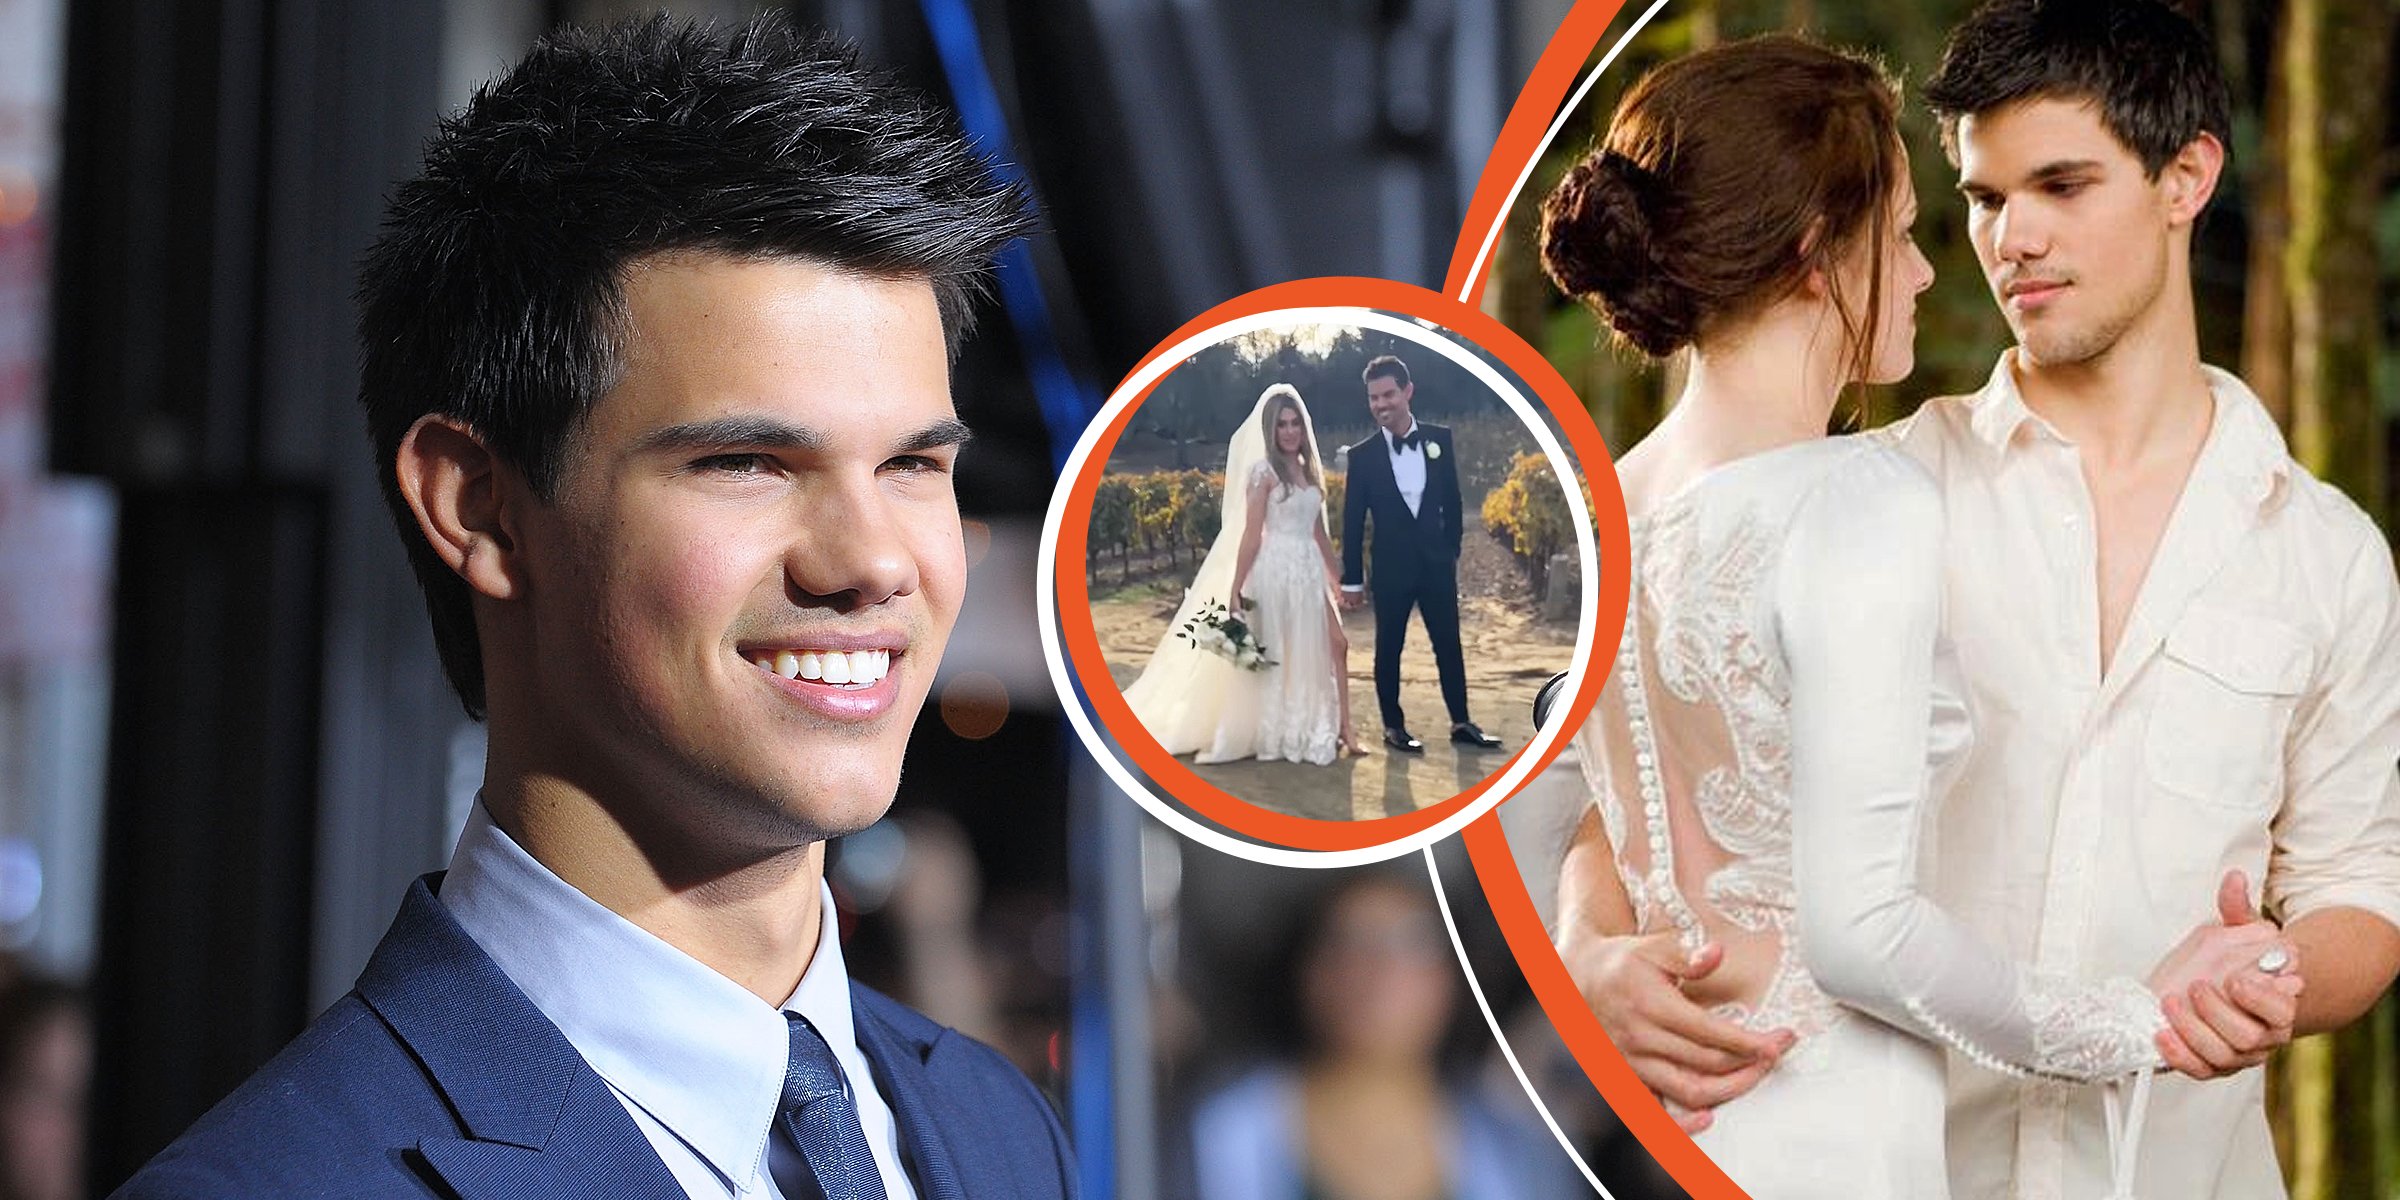 Taylor Lautner | Taylor Lautner and Taylor Dome | Taylor Lautner and Kristen Stewart | Source: Getty Images | facebook.com/twilight 